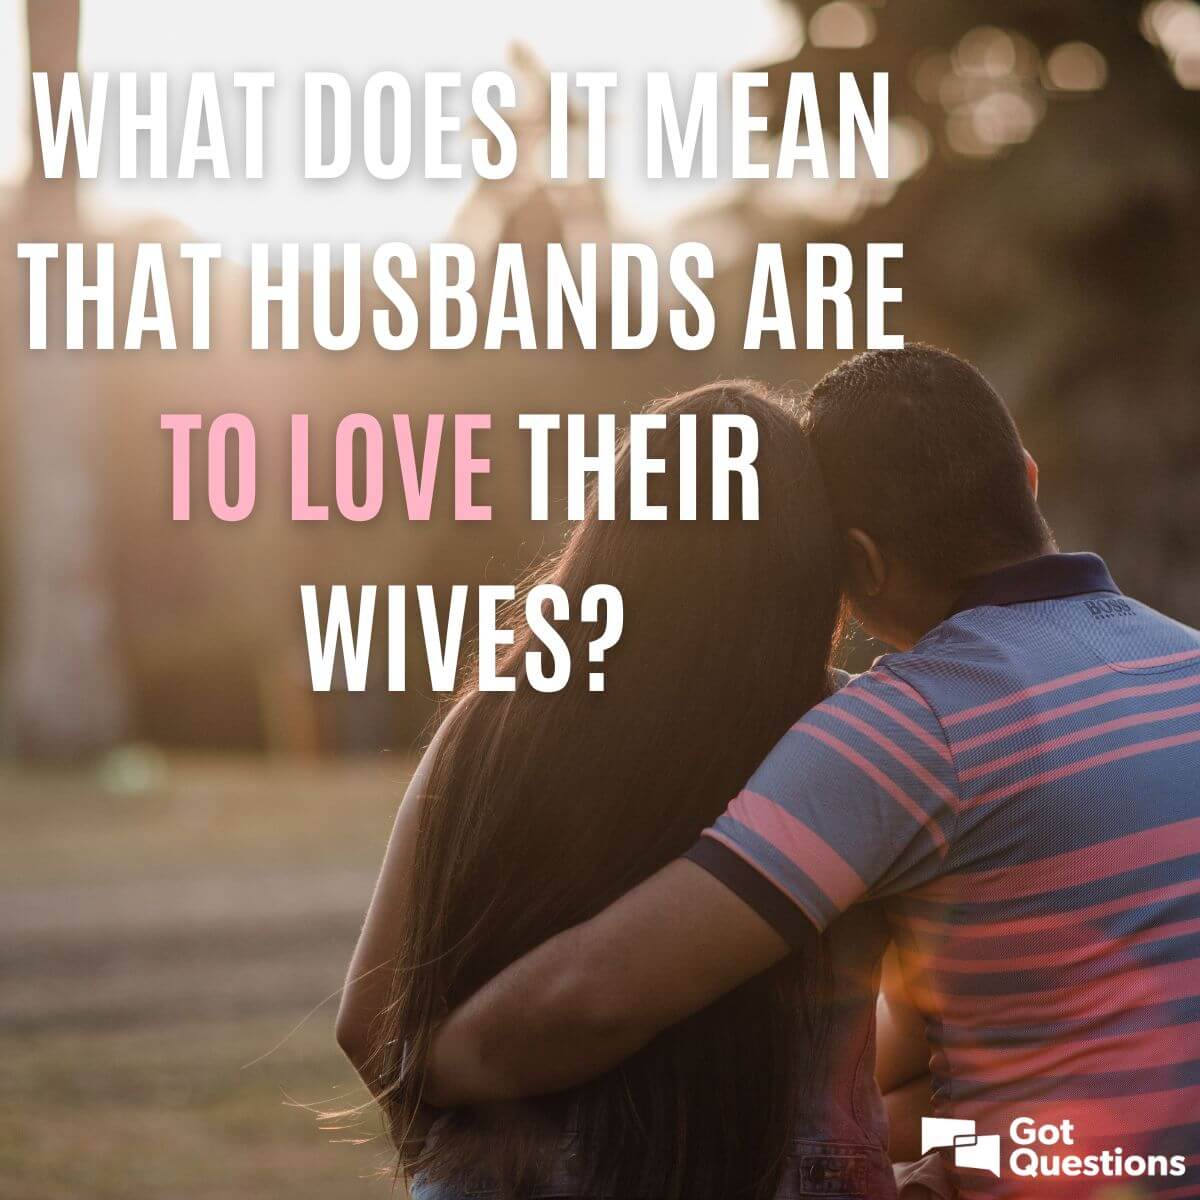 What Does It Mean That Husbands Are To Love Their Wives